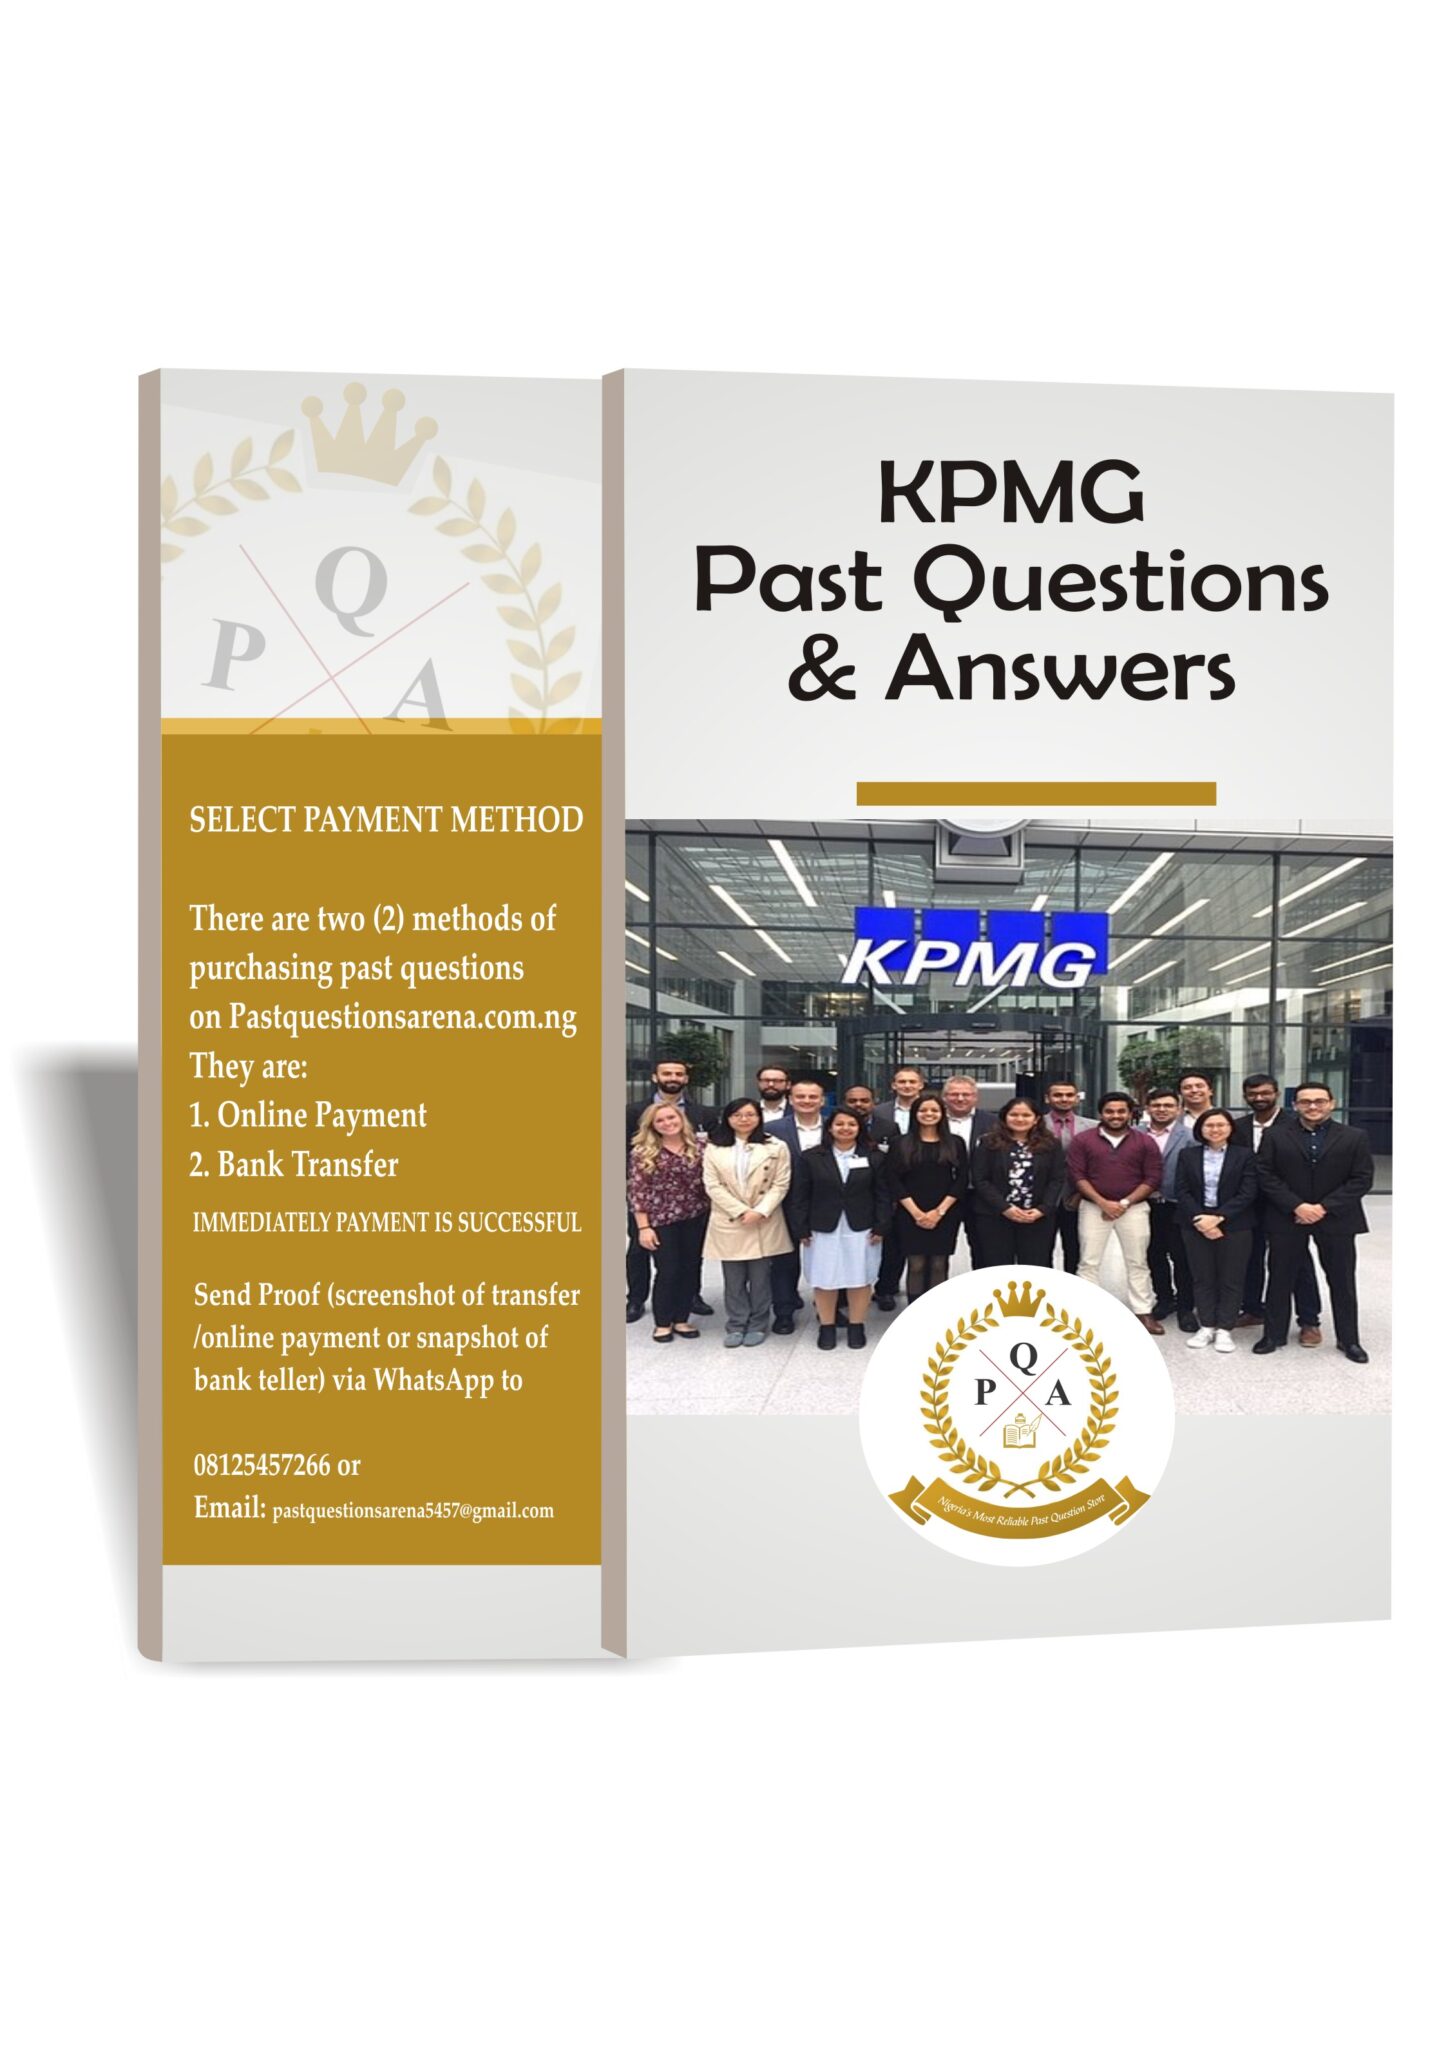 kpmg-past-questions-answers-kpmg-aptitude-test-past-questions